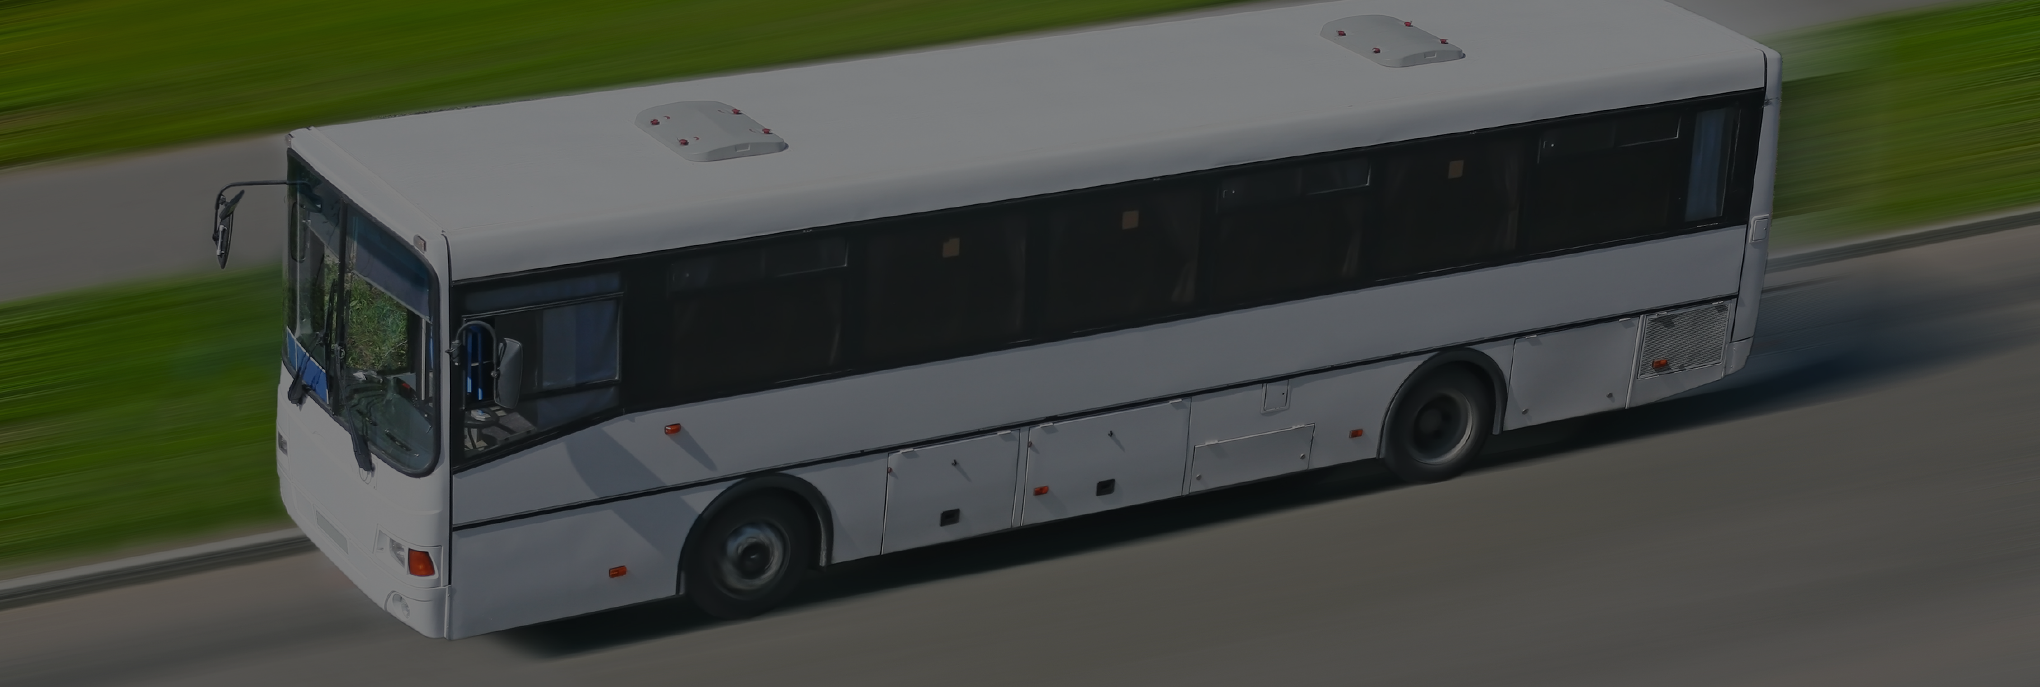 Private Transit Commuter Bus